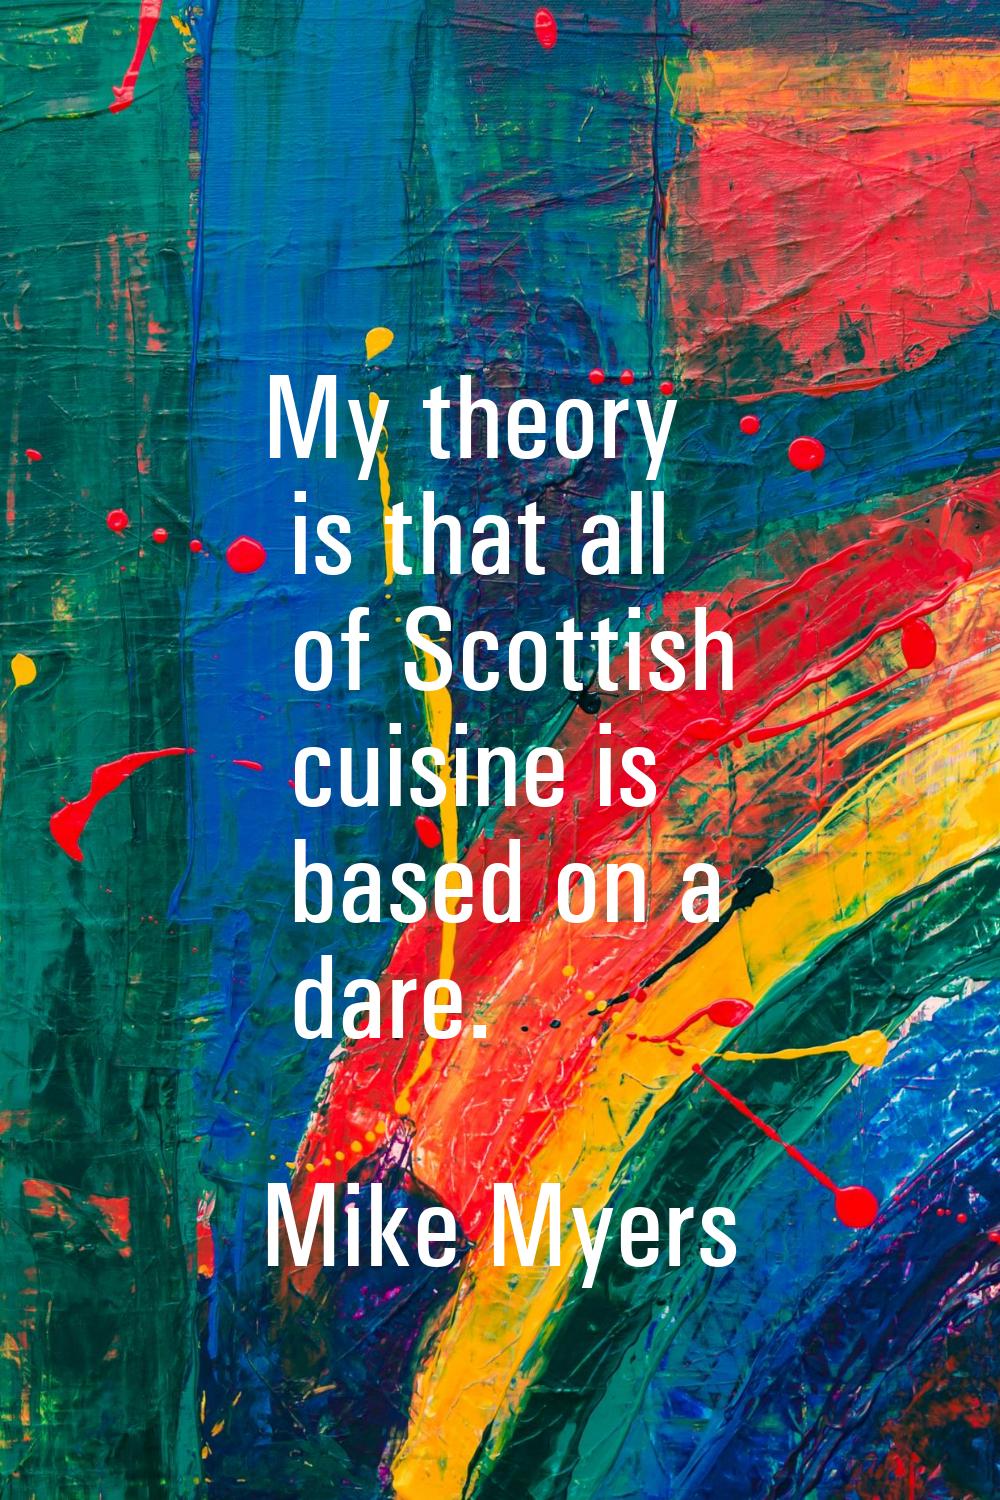 My theory is that all of Scottish cuisine is based on a dare.